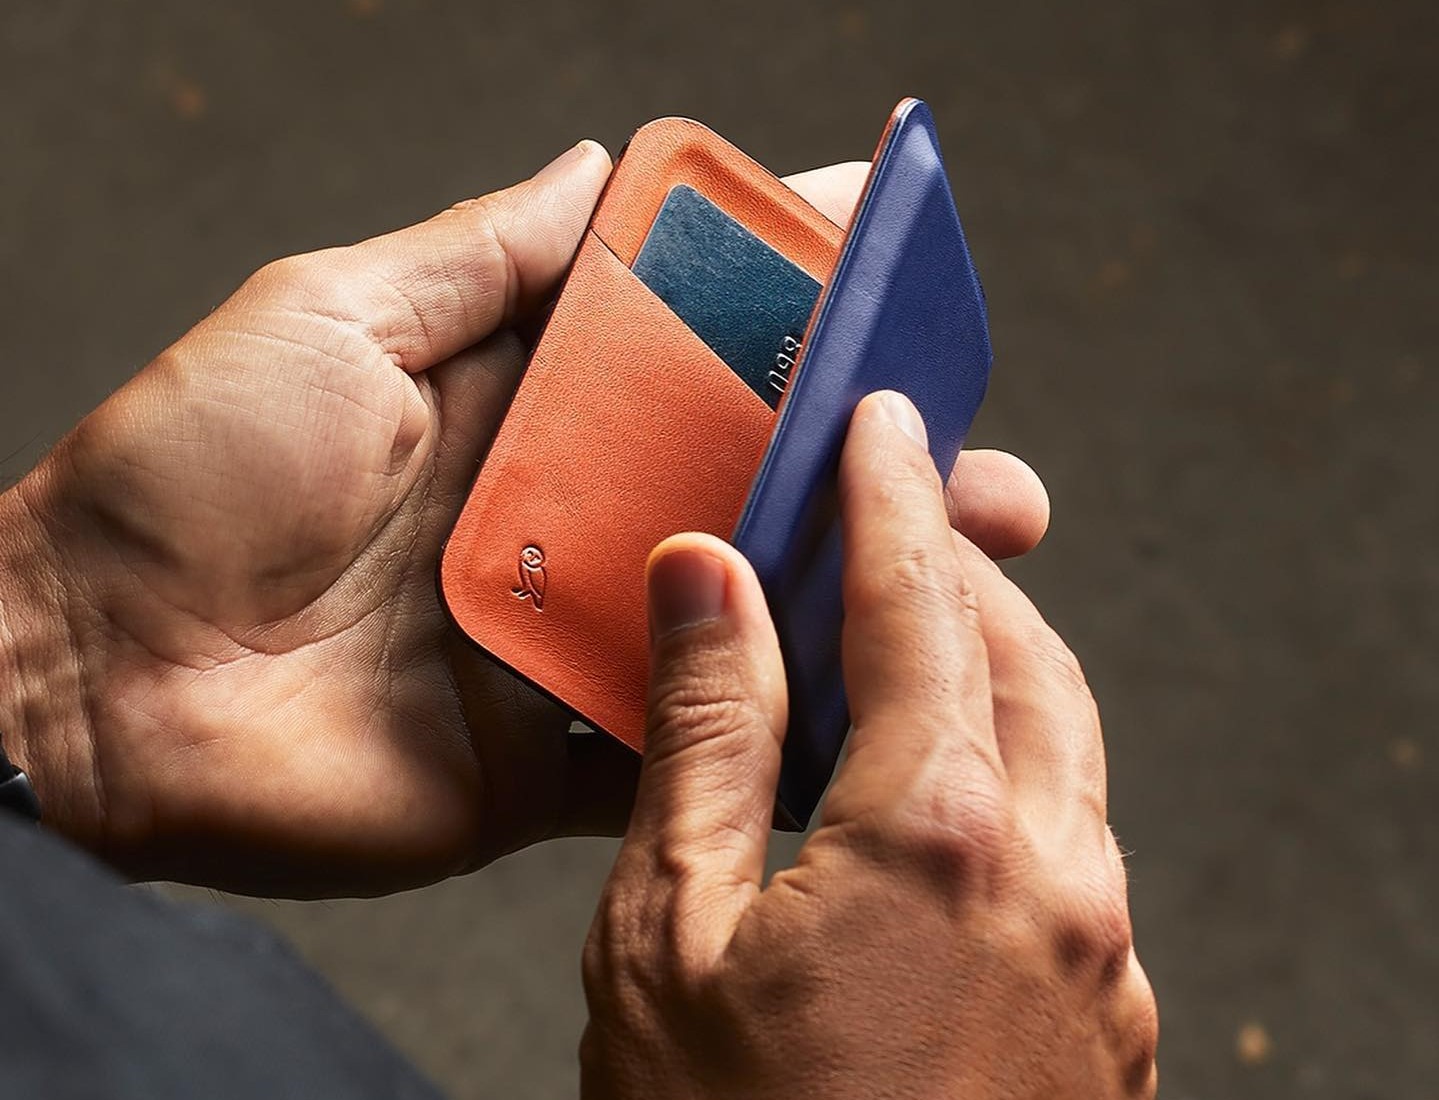 23 Of The Best Minimalist Wallets That Will Keep Your Pockets Modern And Slim (Updated 2022)